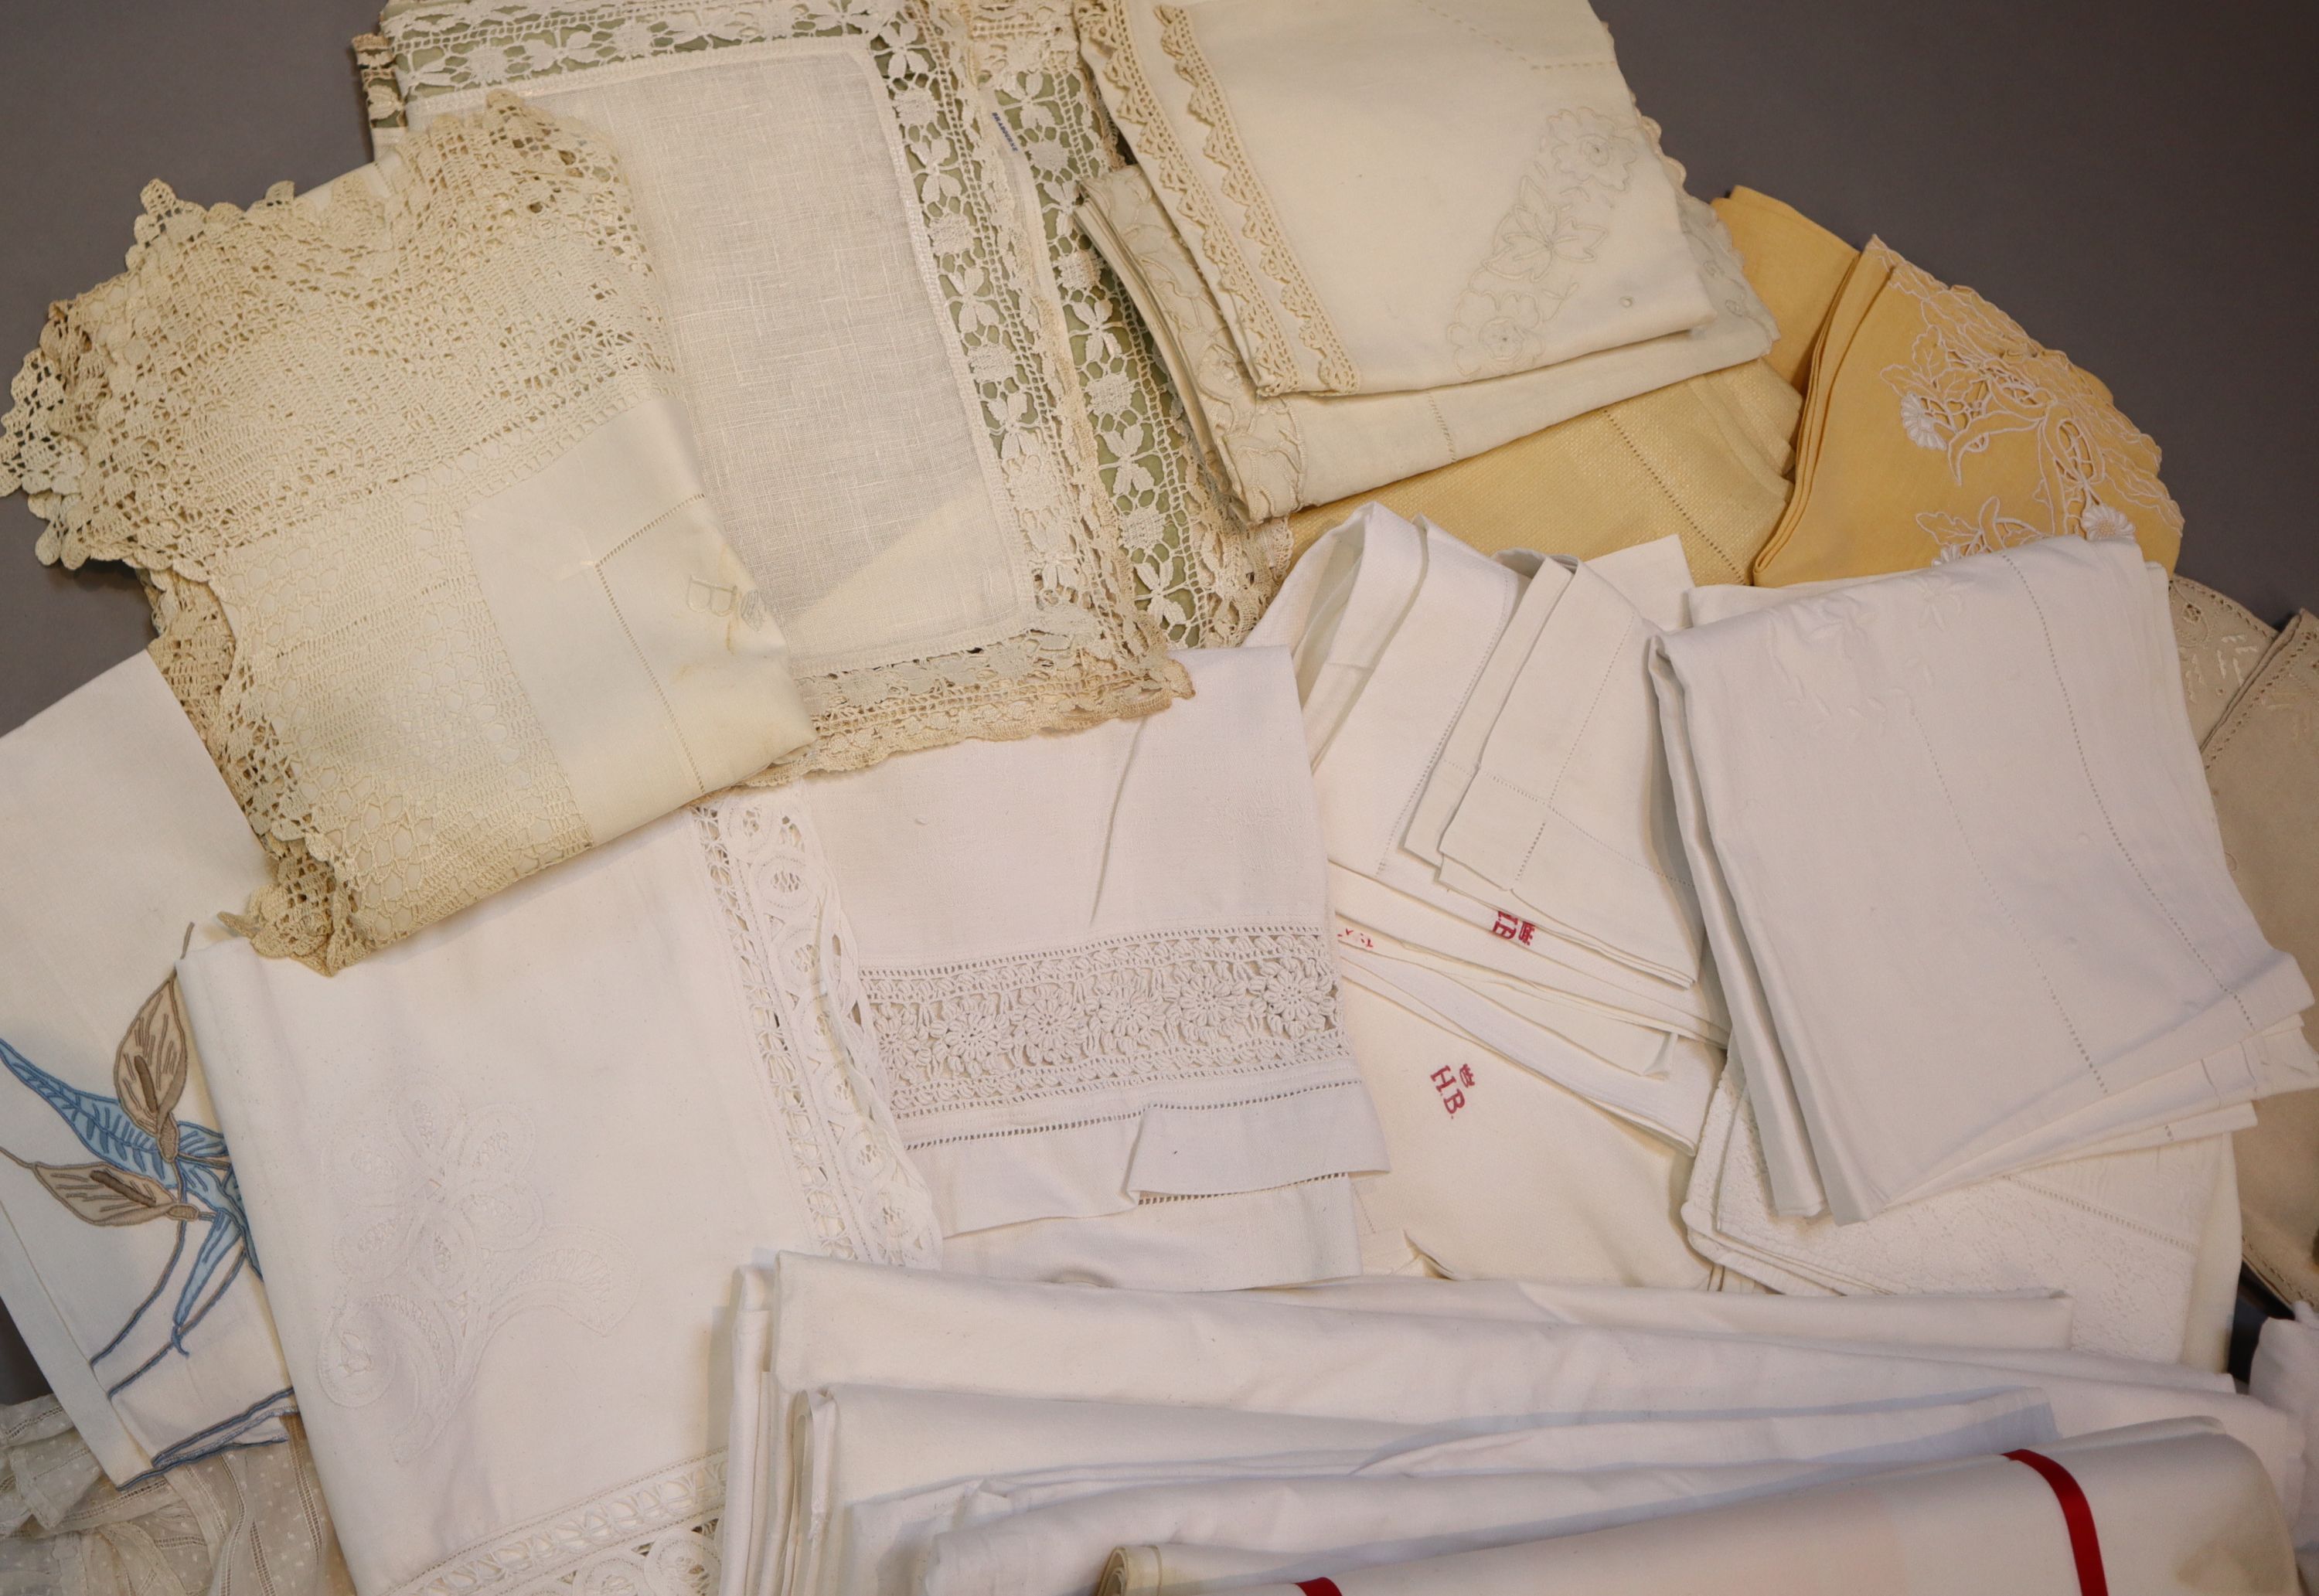 A quantity of linen sheets and embroidery